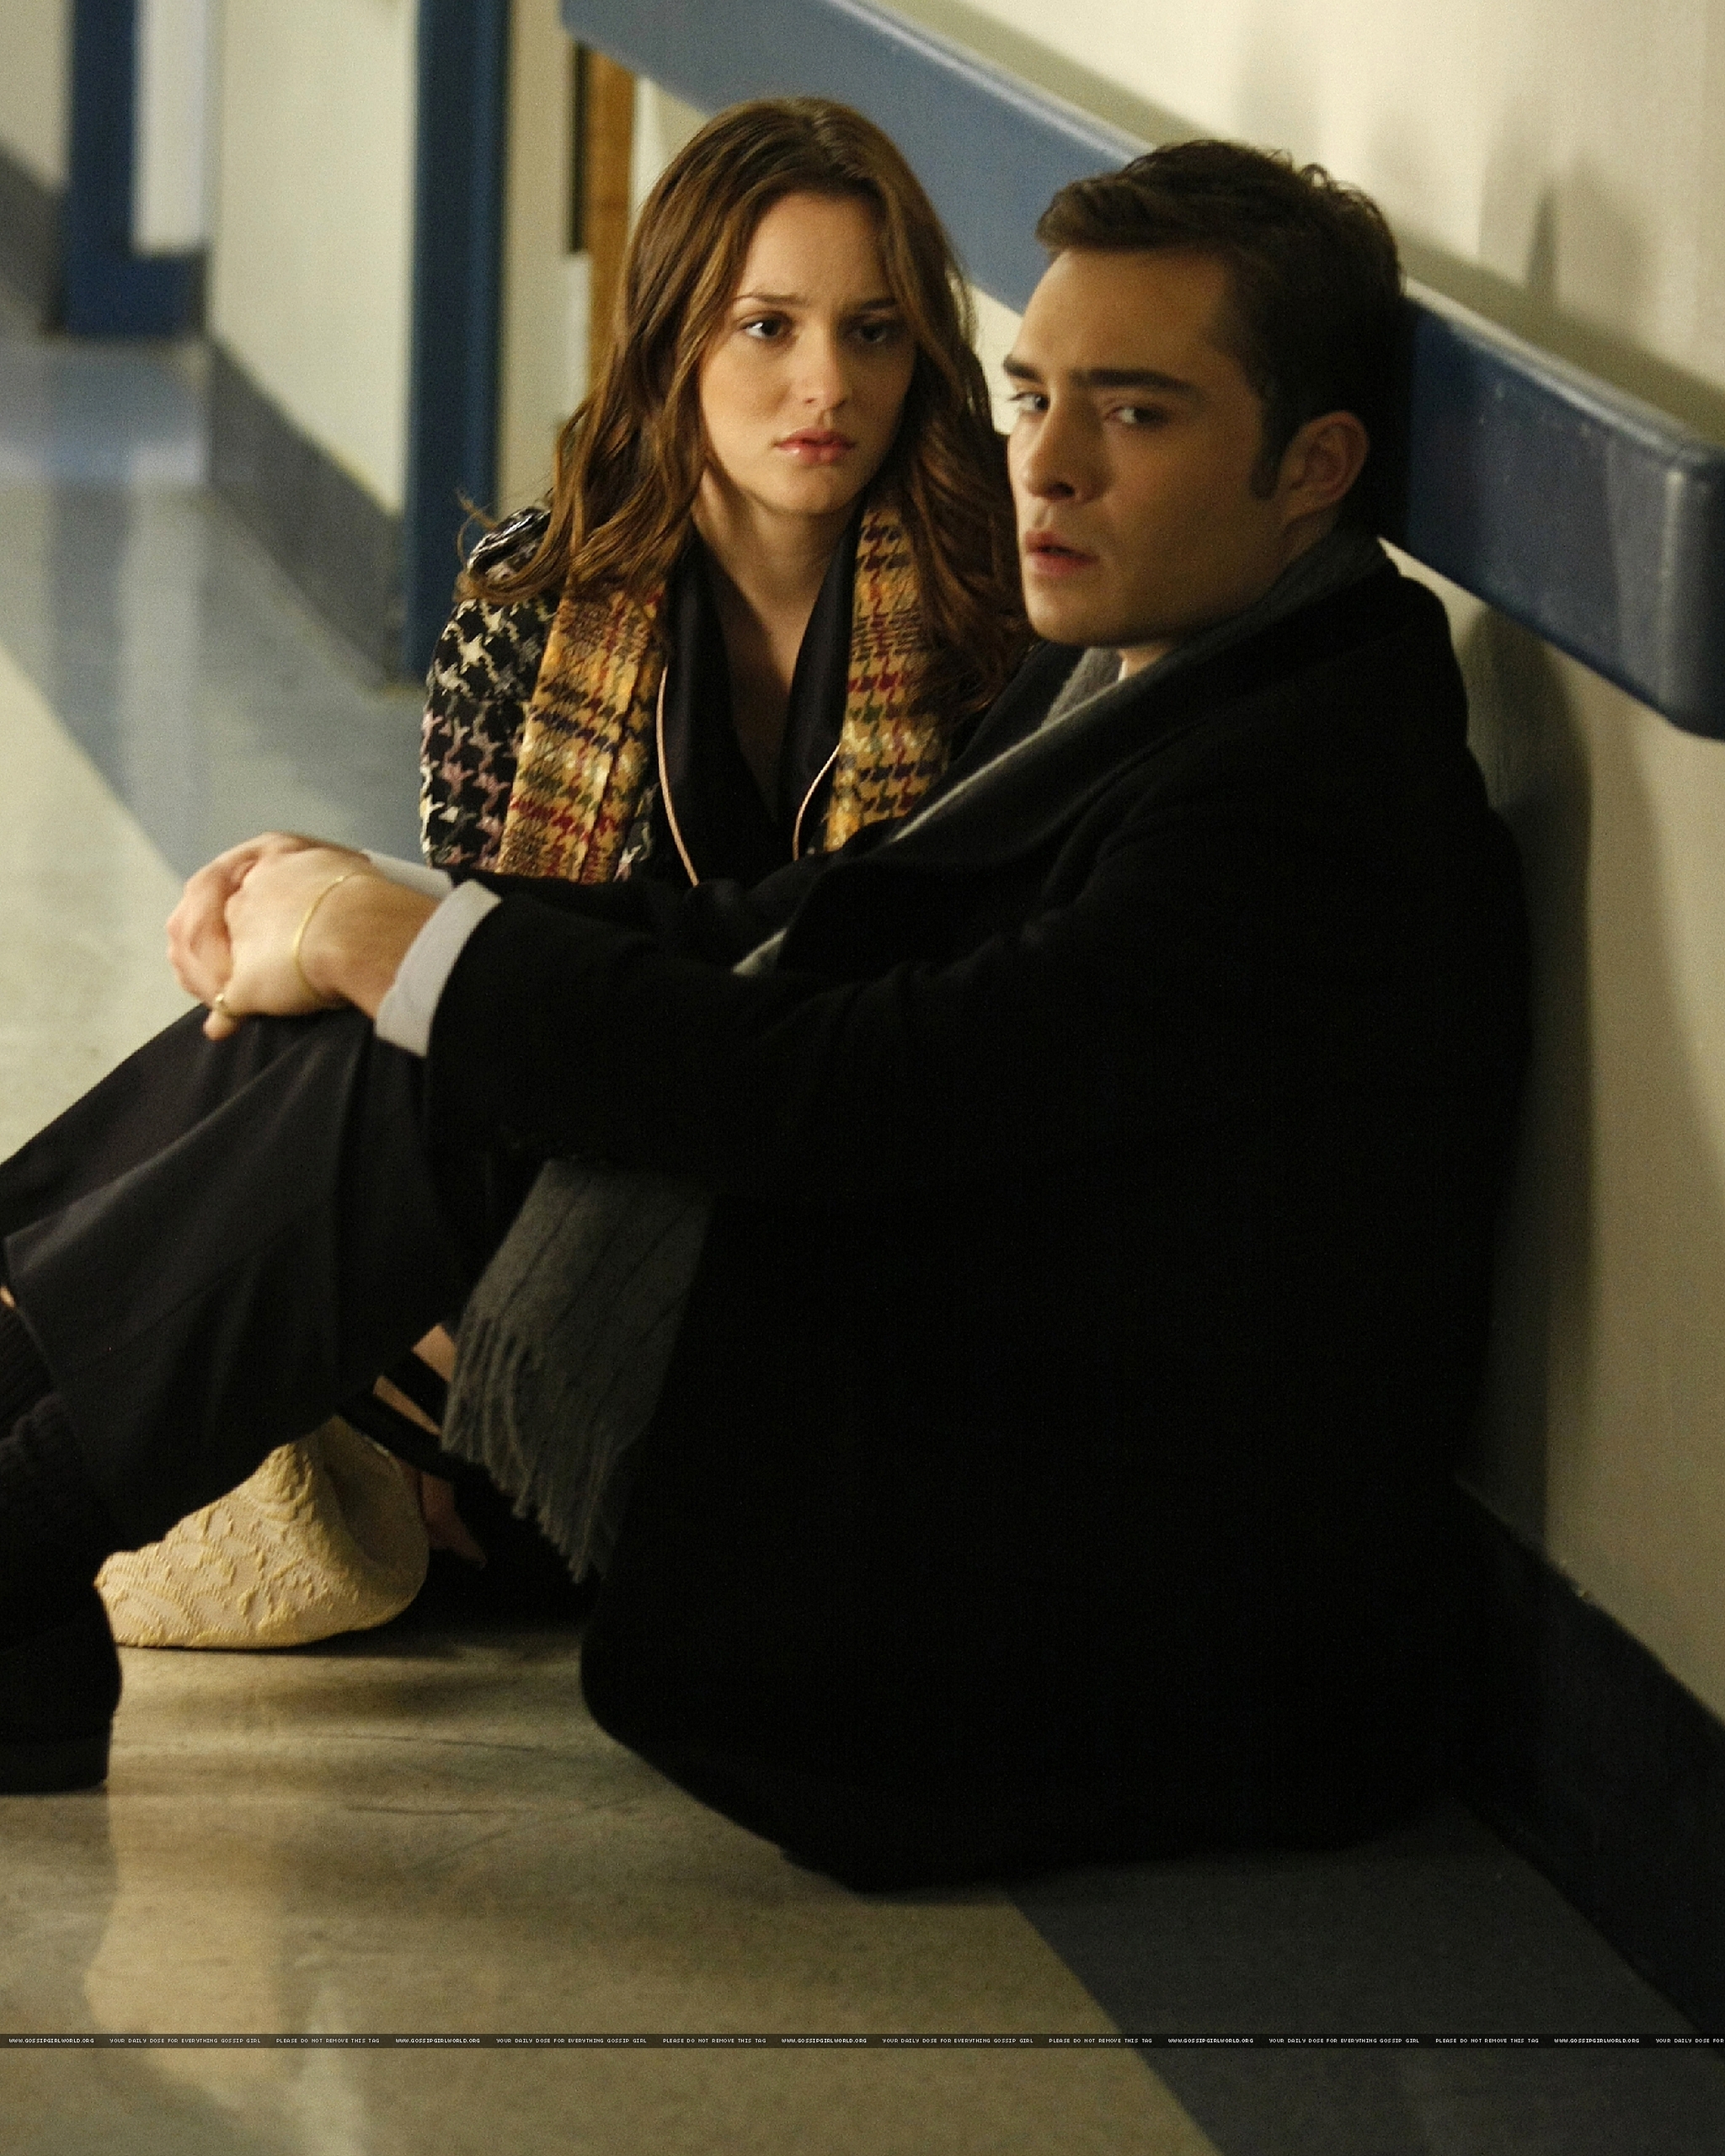 https://static.wikia.nocookie.net/gossipgirl/images/b/b1/The-Debarted.jpeg/revision/latest?cb=20110118002802